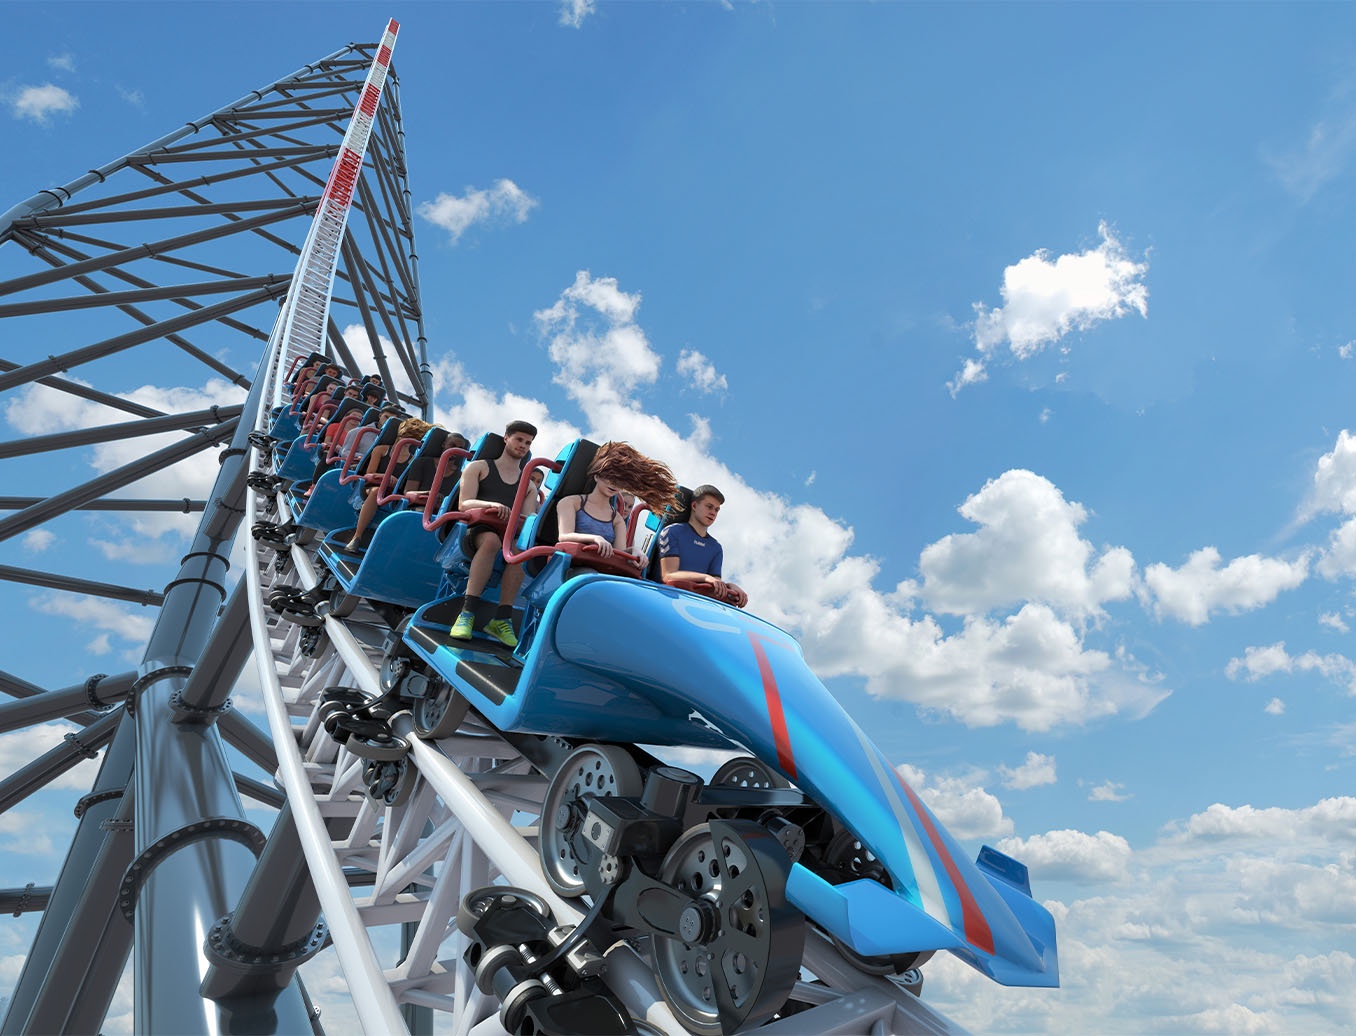 Which Companies Make Winged Coasters?